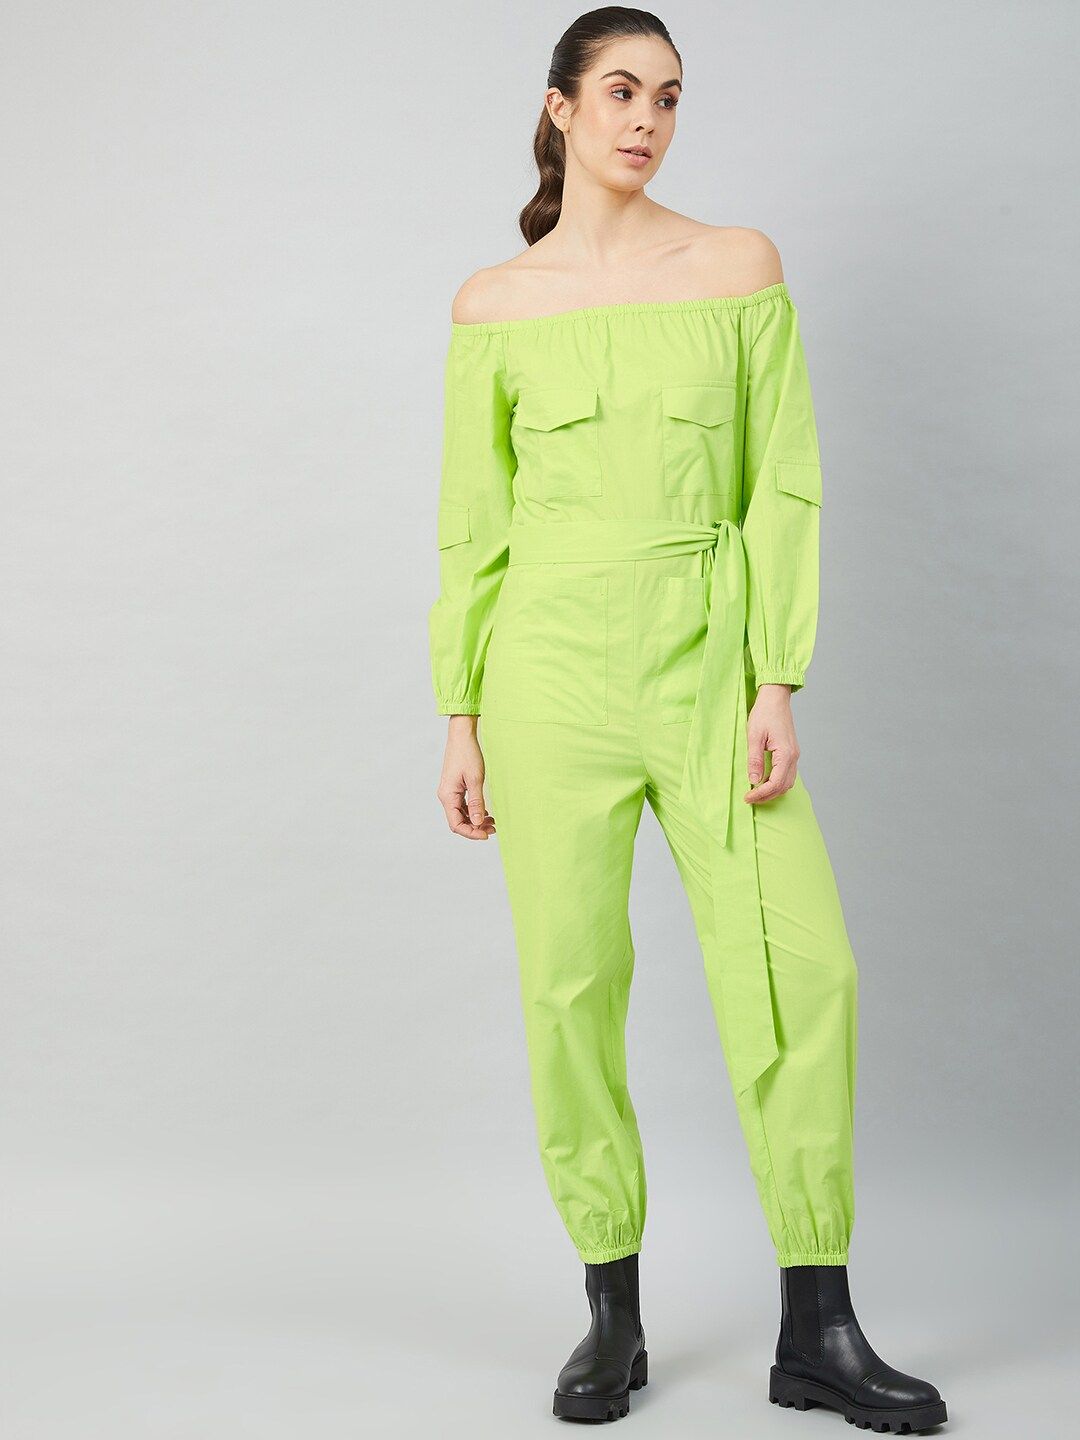 Athena Women Lime Green Solid Cotton Jumpsuit Price in India